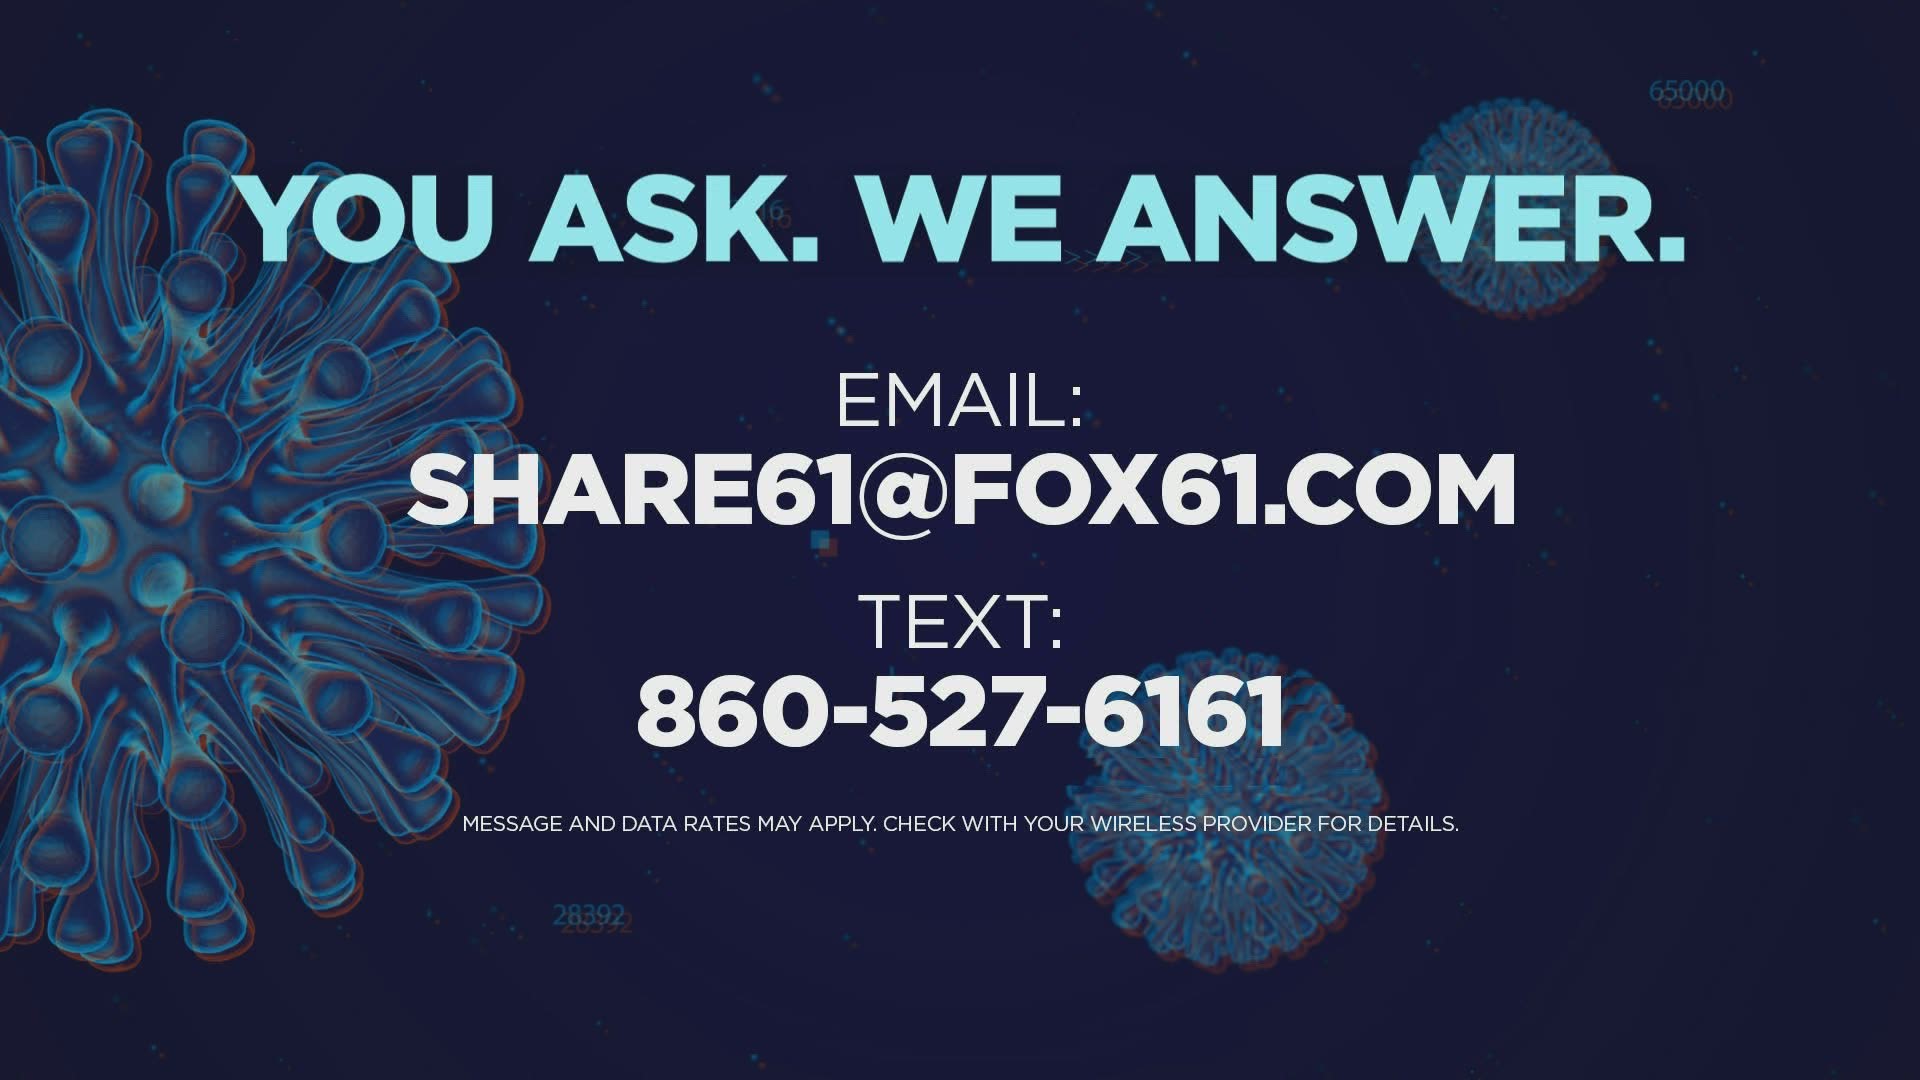 If you have questions you would like to be answered, email Share61@fox61.com